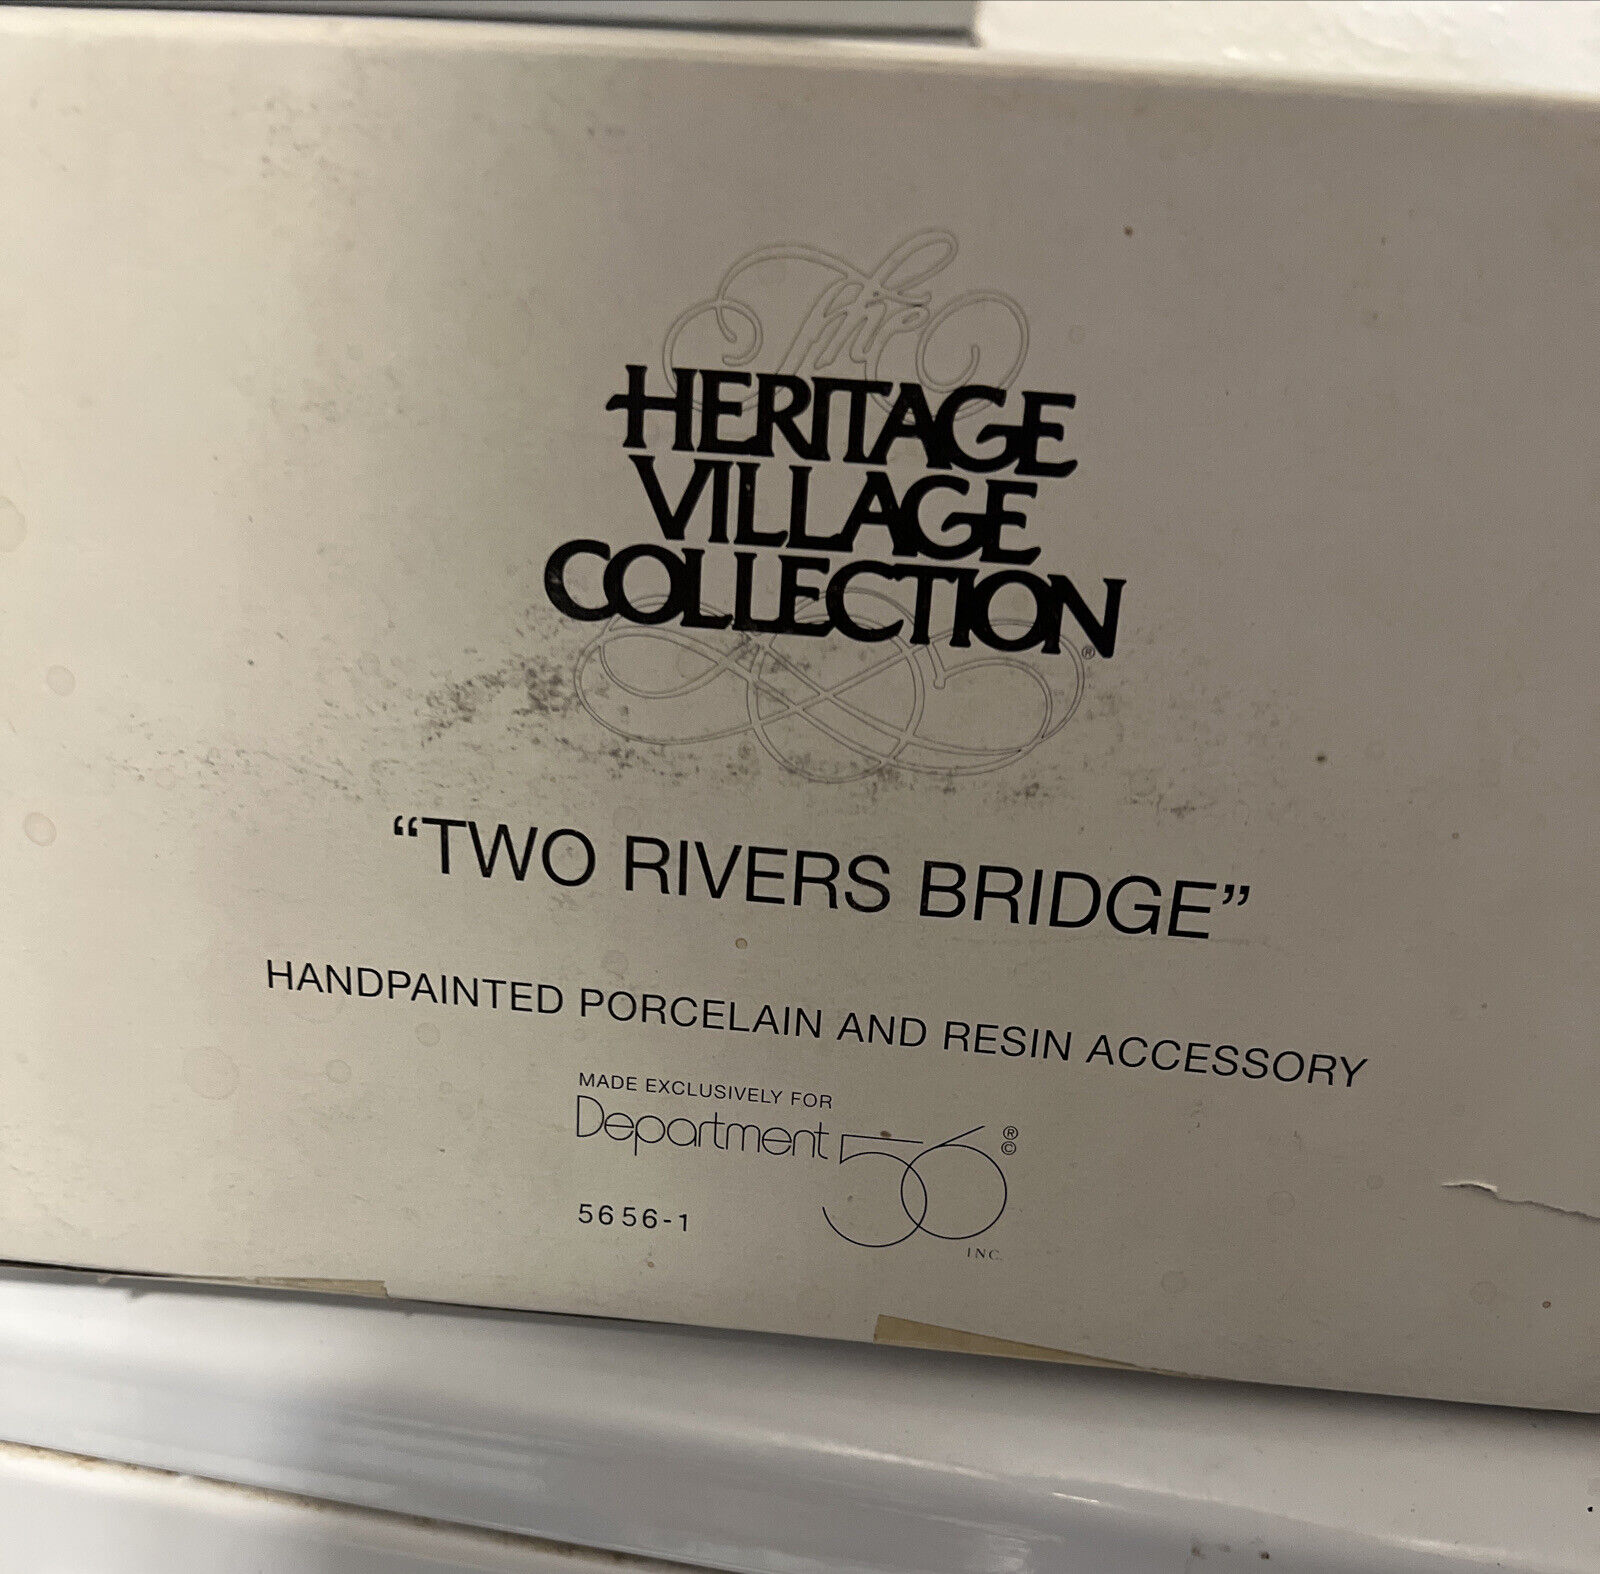 Dept. 56 Two Rivers Bridge #5656-1 Retired Heritage Village Collection